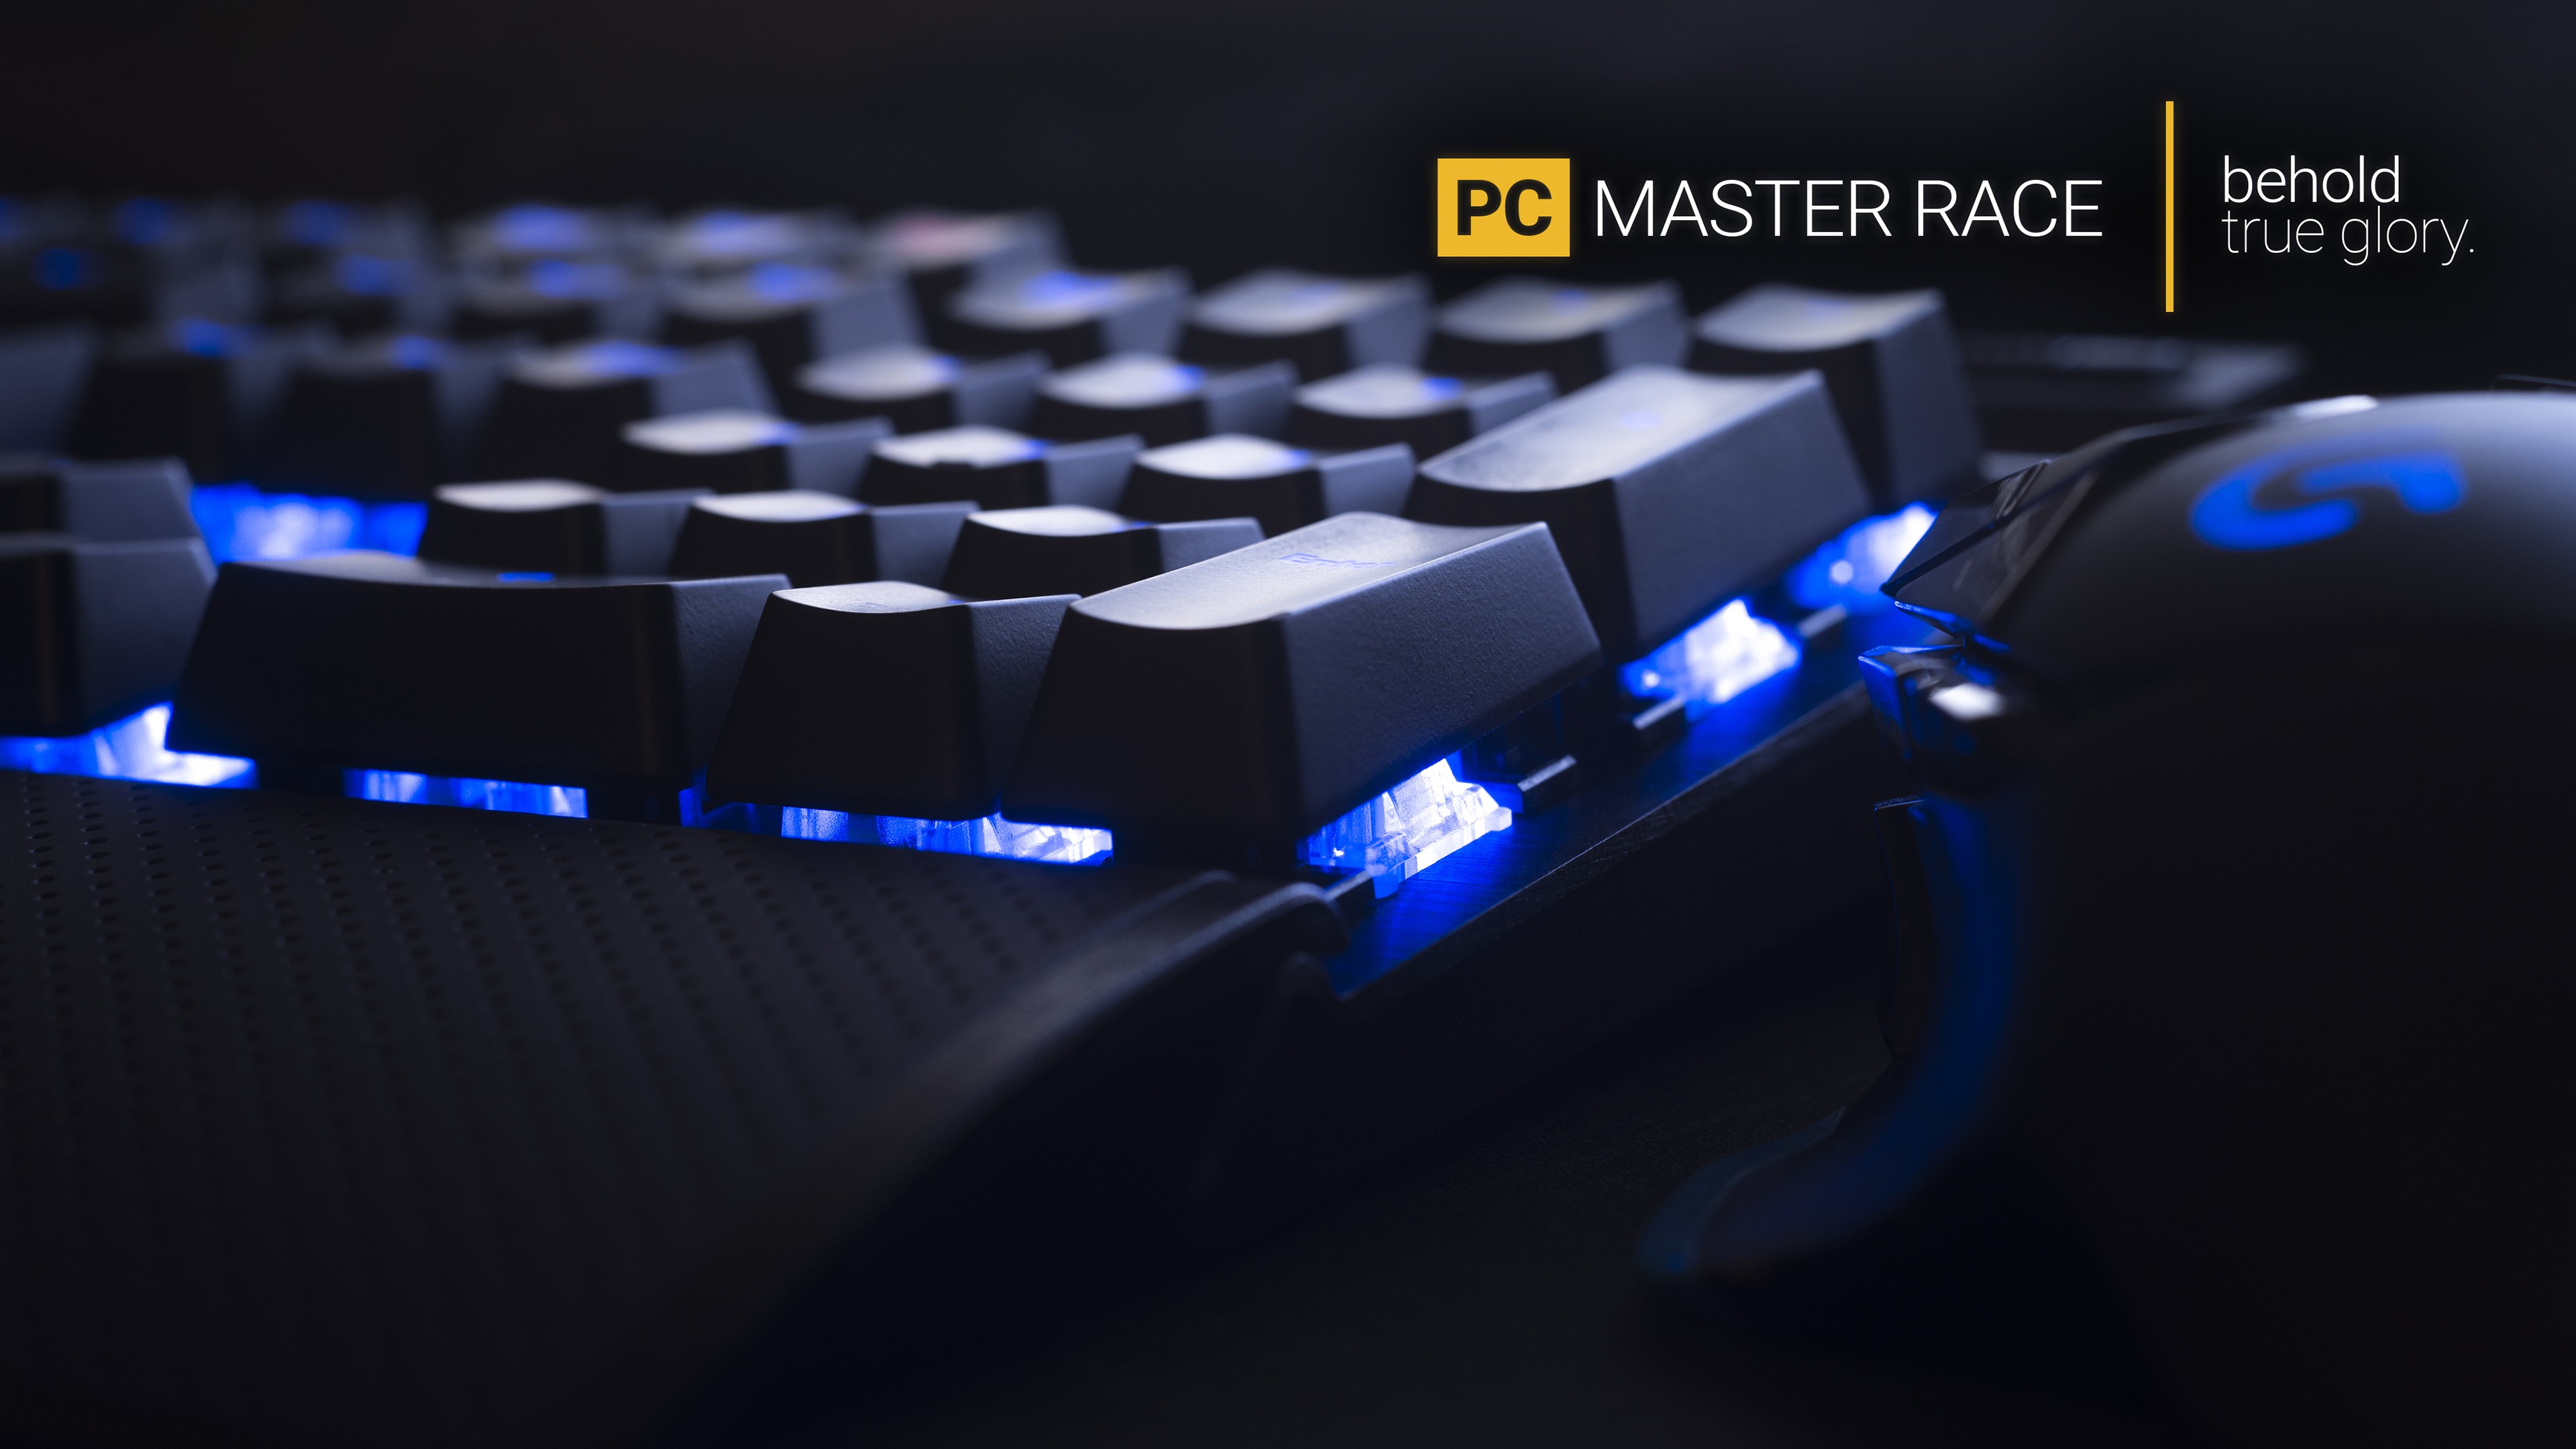 PC Gaming Master Race Keyboards Technology Computer Mice Hardware Computer PC Master Race Keyboards  3840x2160